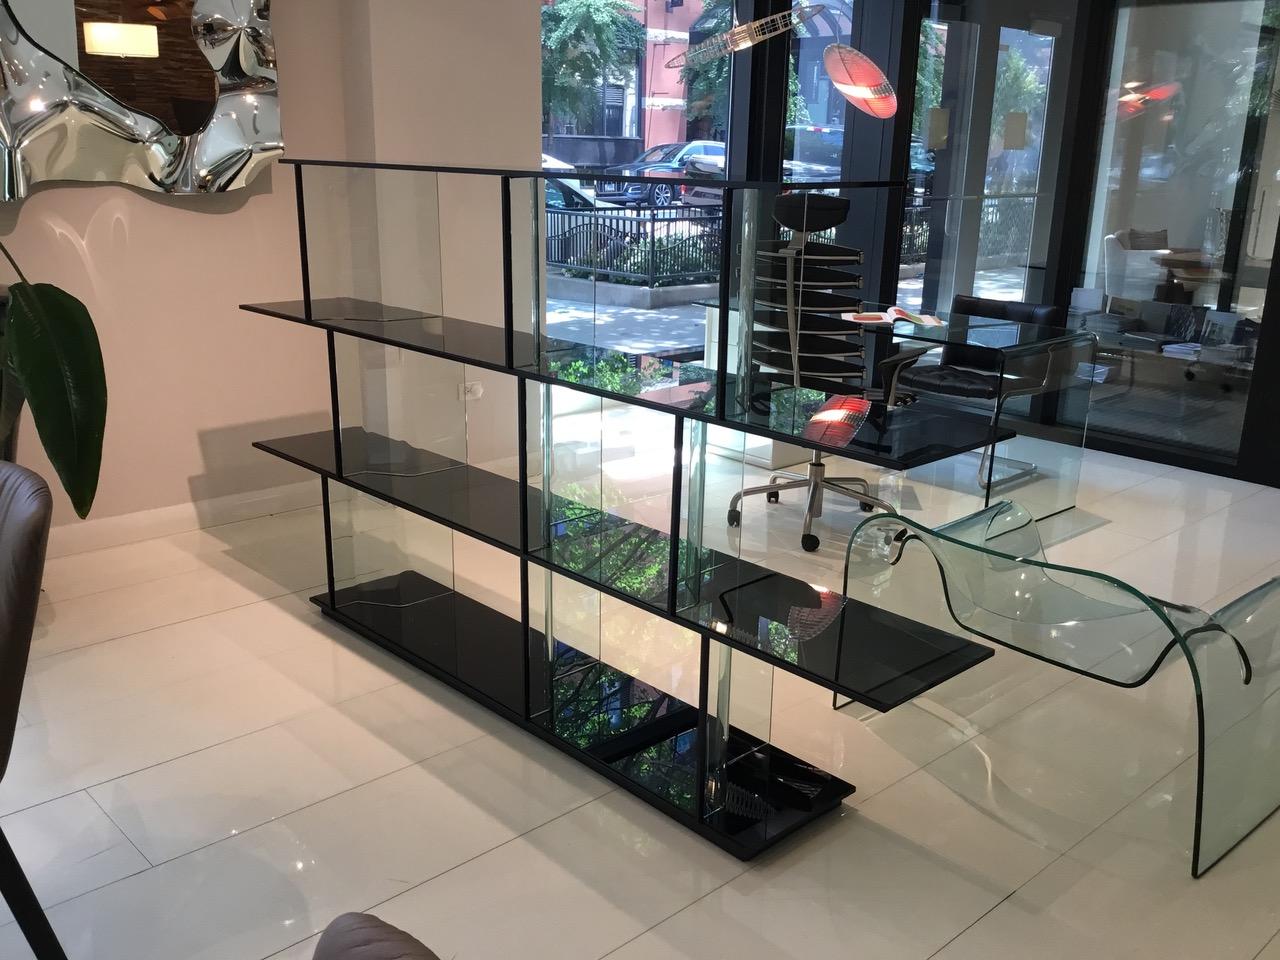 The Inori modular bookcase, designed for Fiam by Setsu & Shinobu Ito, is the first system in the furniture industry entirely made of glass, and composed of modular elements.

Showroom display in good condition. Bookcase in a combination of black,